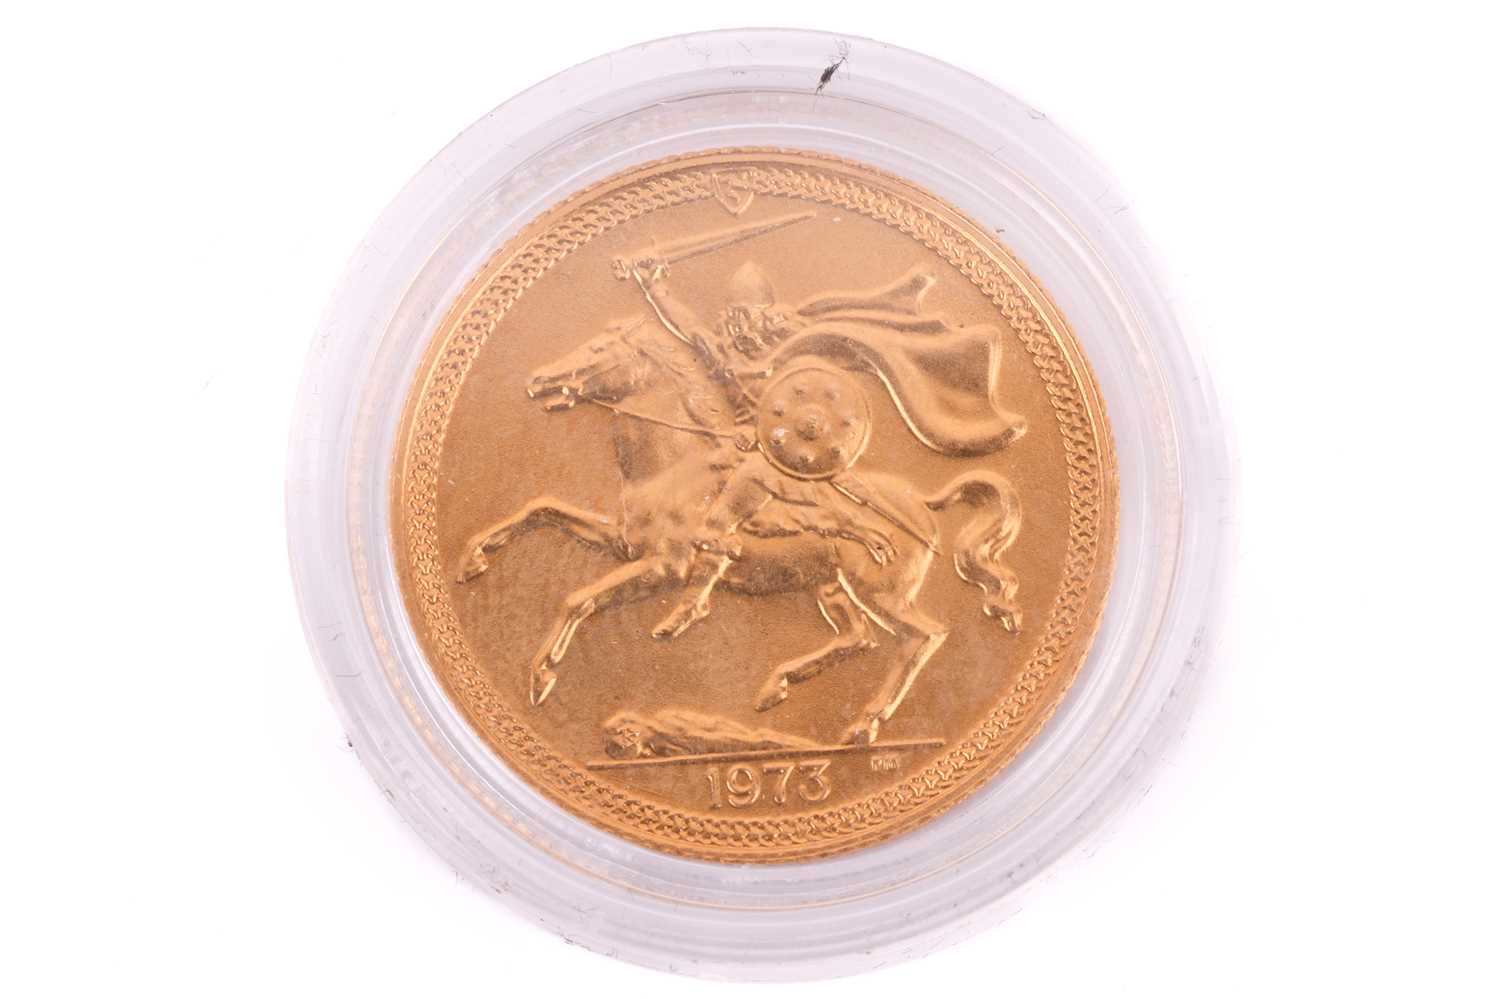 A 1973 Isle Of Man Elizabeth II Full-Sovereign with a plastic case, circulated.